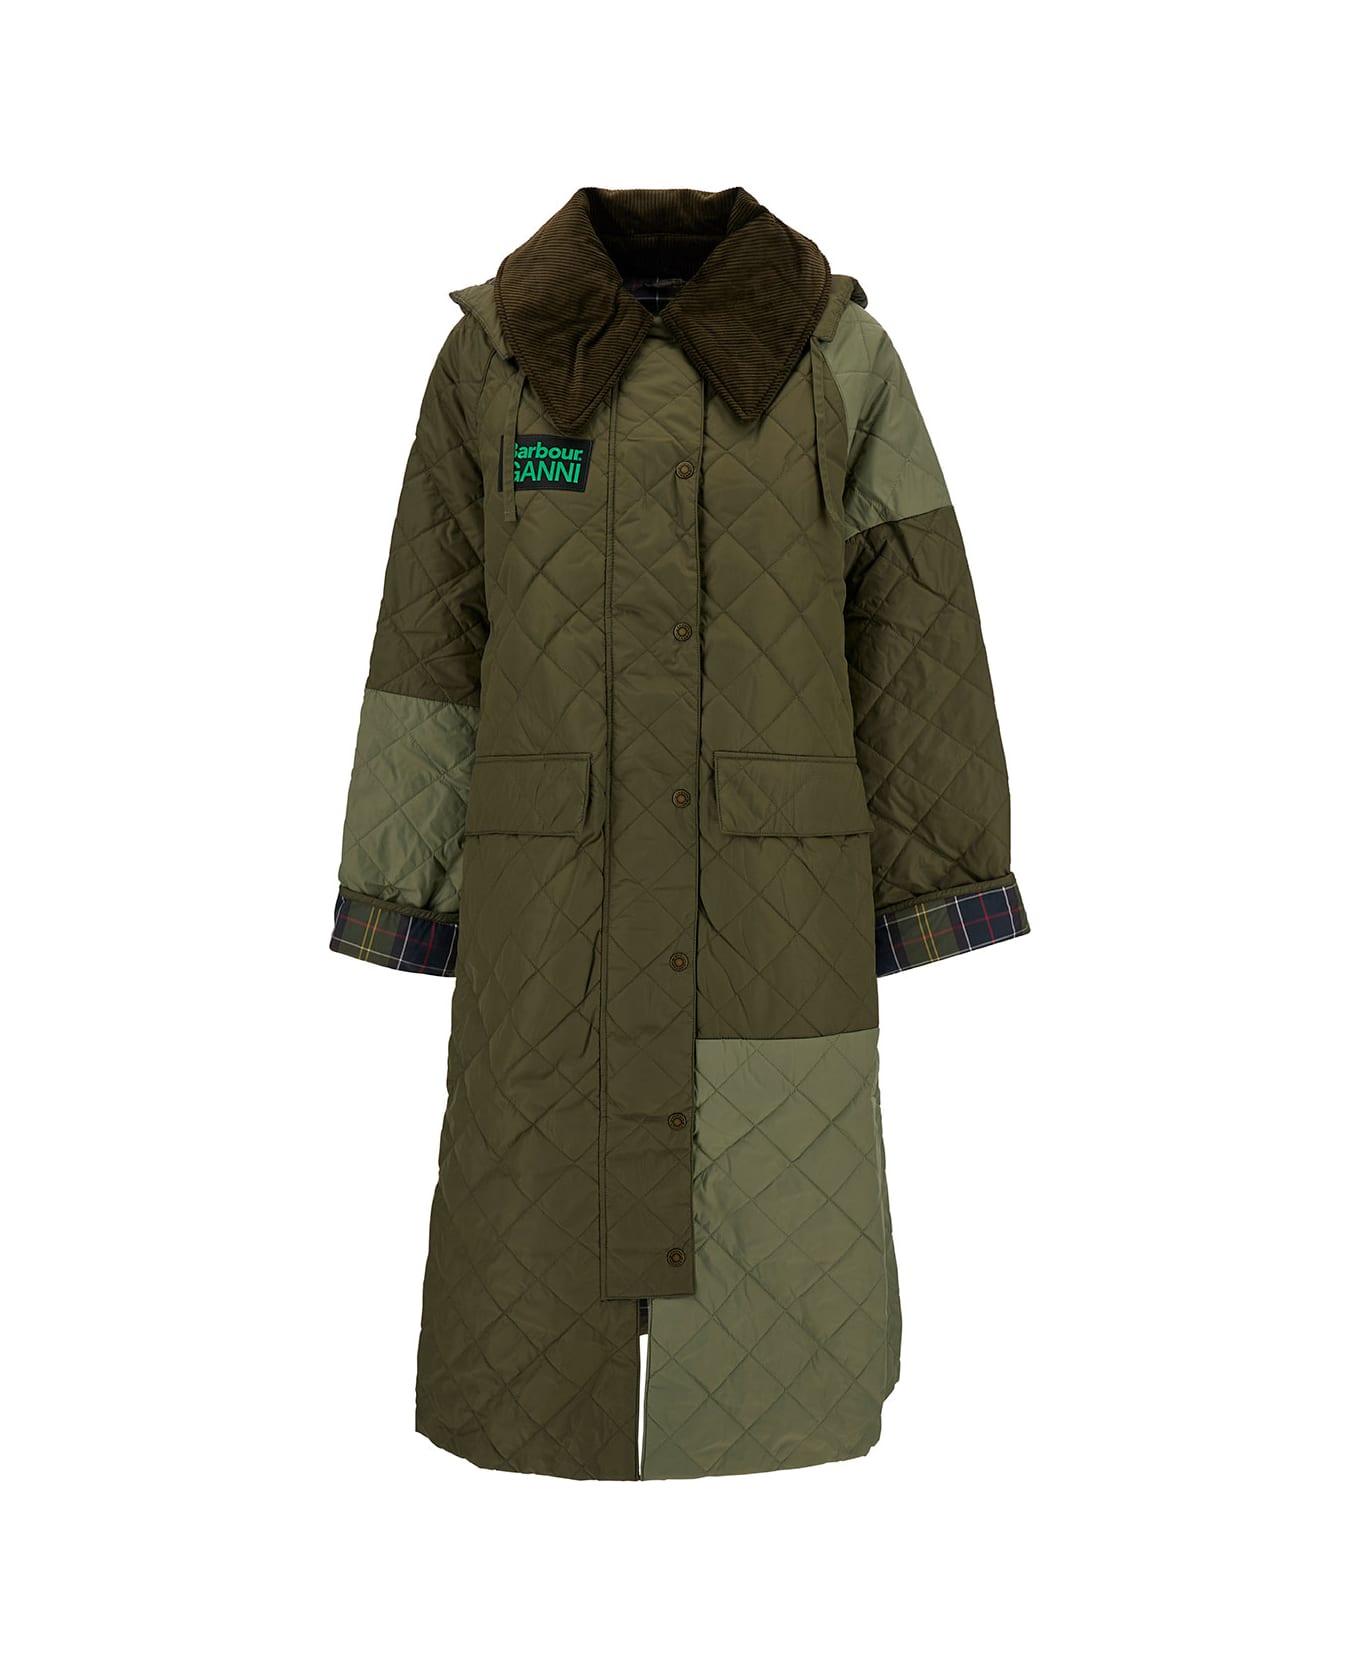 Barbour Green Patchwork Jacket With Logo Patch In Quilted Fabric Woman - Green コート